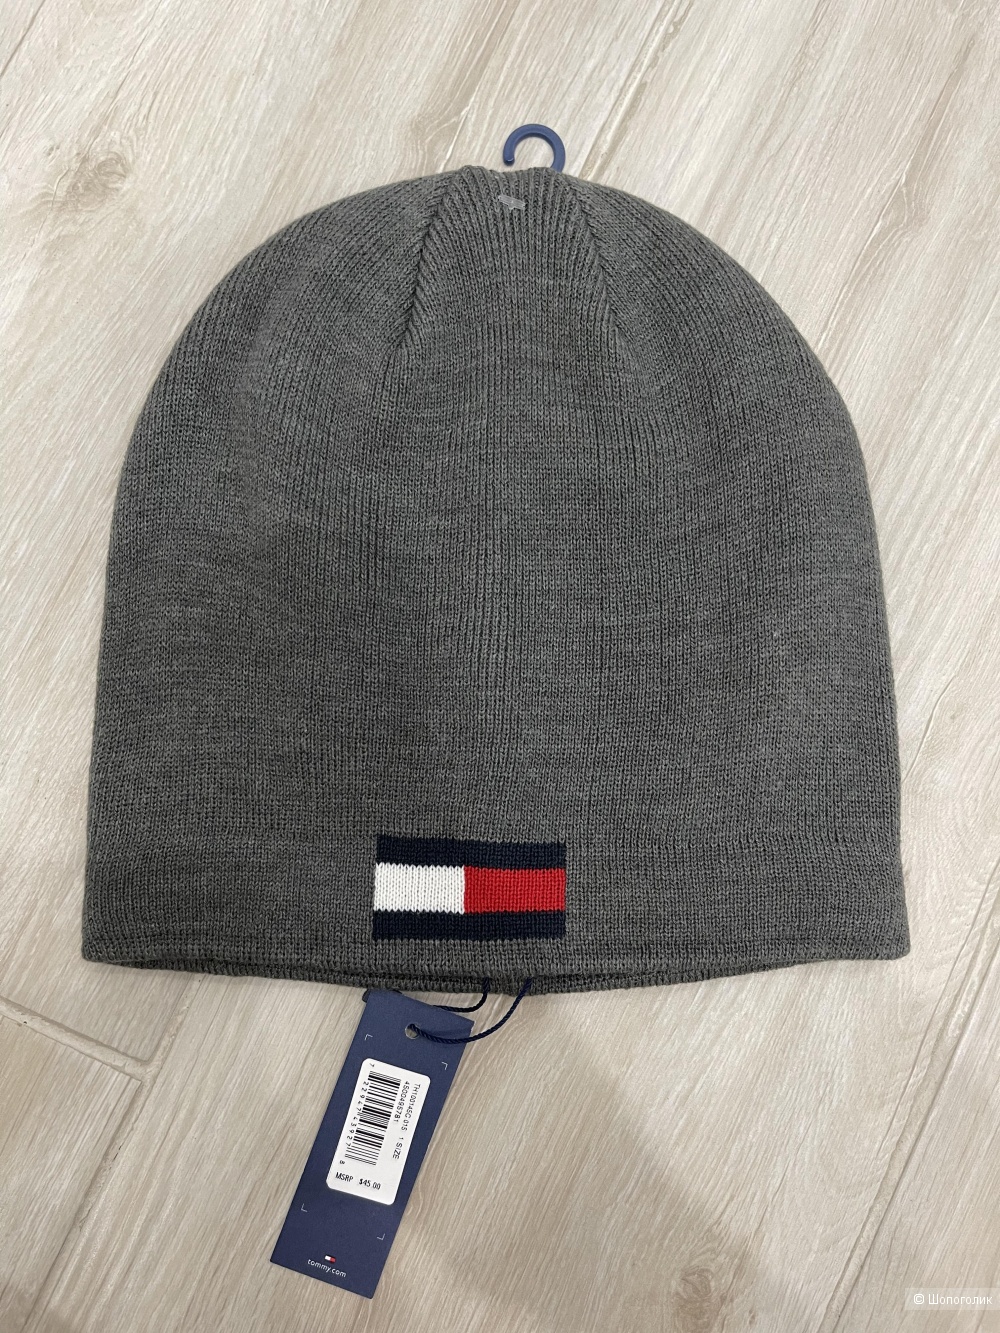 Шапка Tommy Hilfiger размер one size